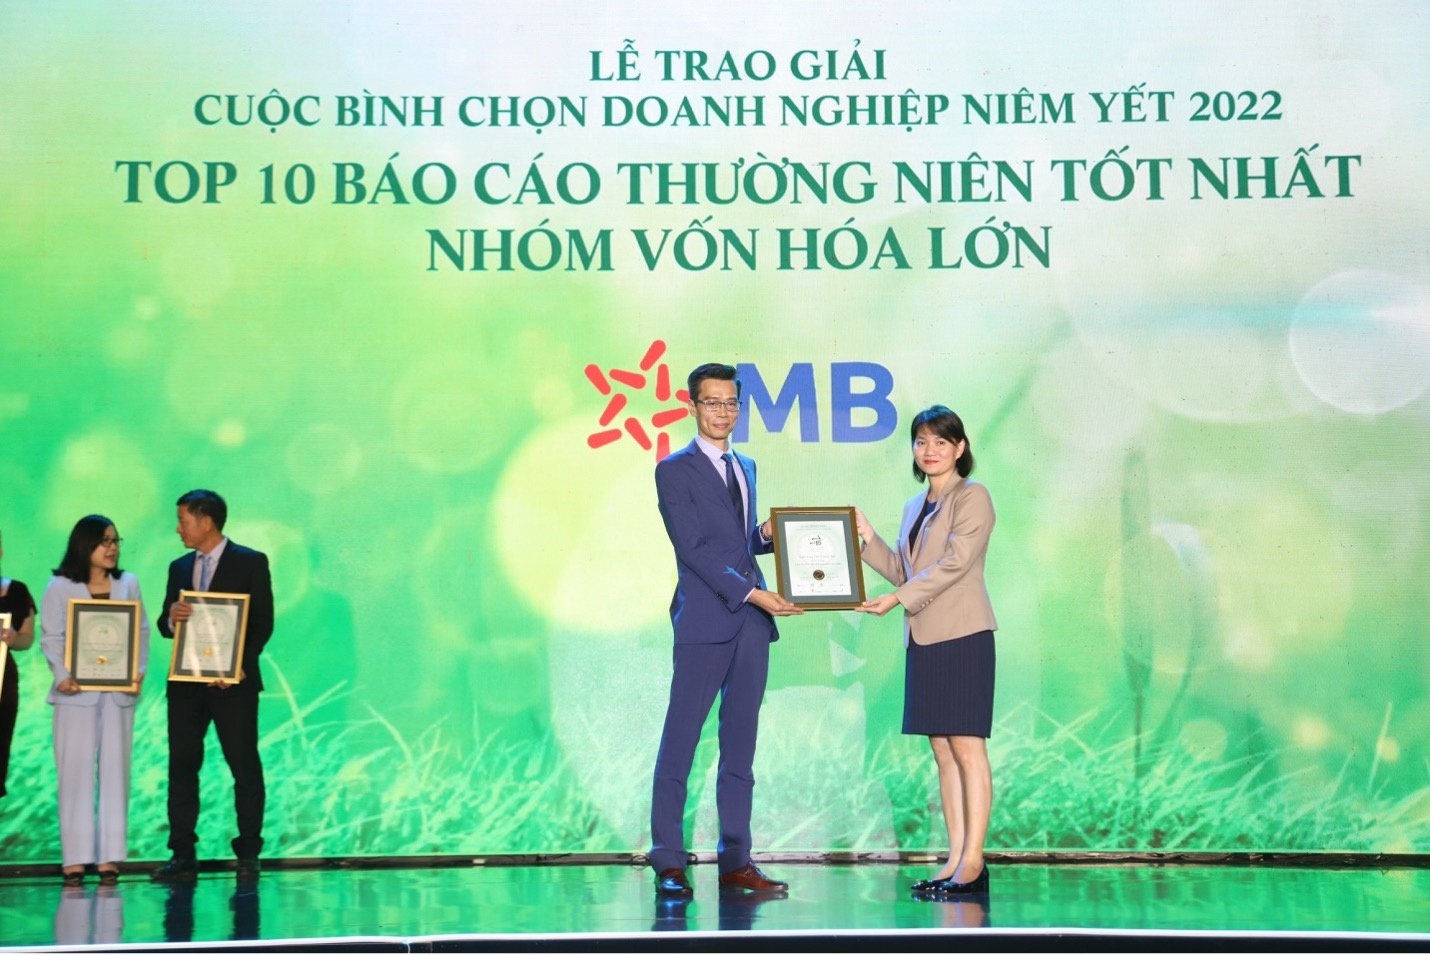 MBB listed among top companies with best annual reports in Vietnam